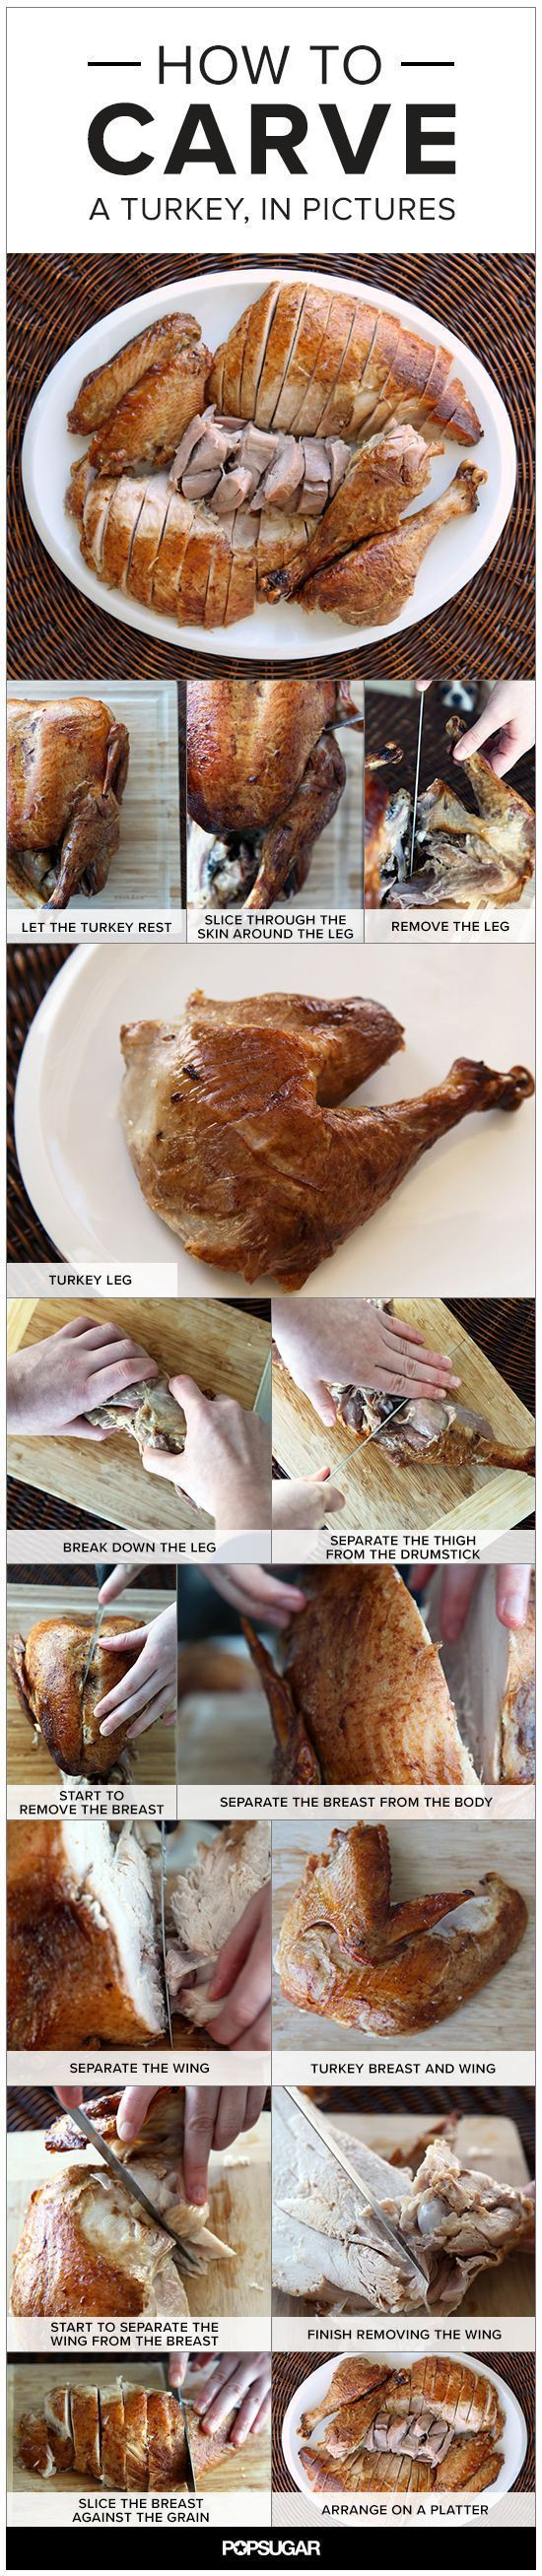 Who Will Carve The Turkey This Thanksgiving
 How to Carve a Turkey in